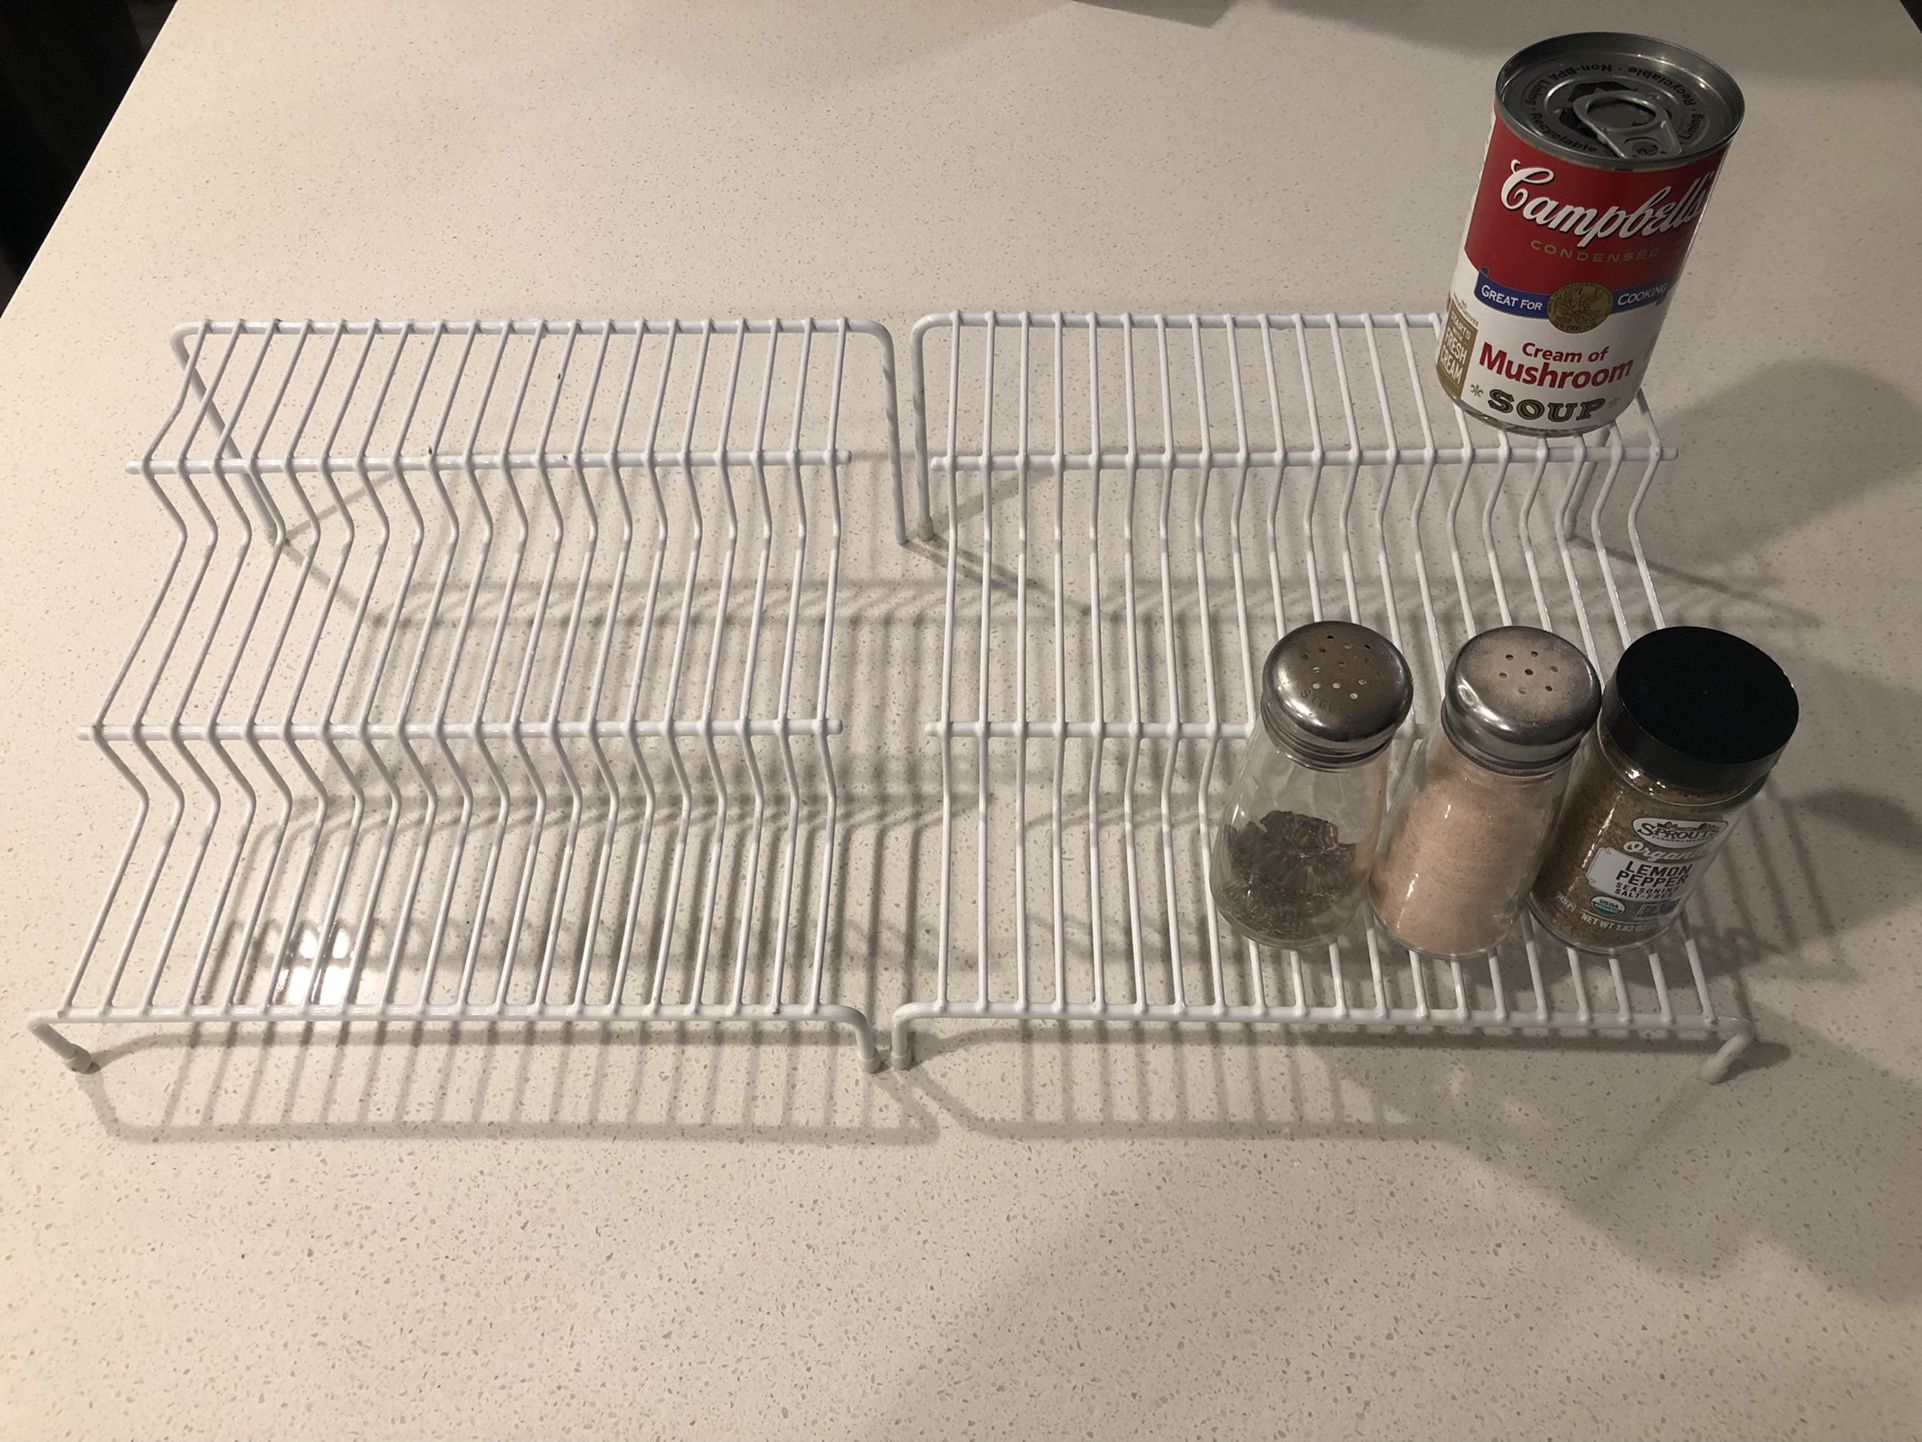 Organizing Racks For Cans Or Spices Or Craft Jars